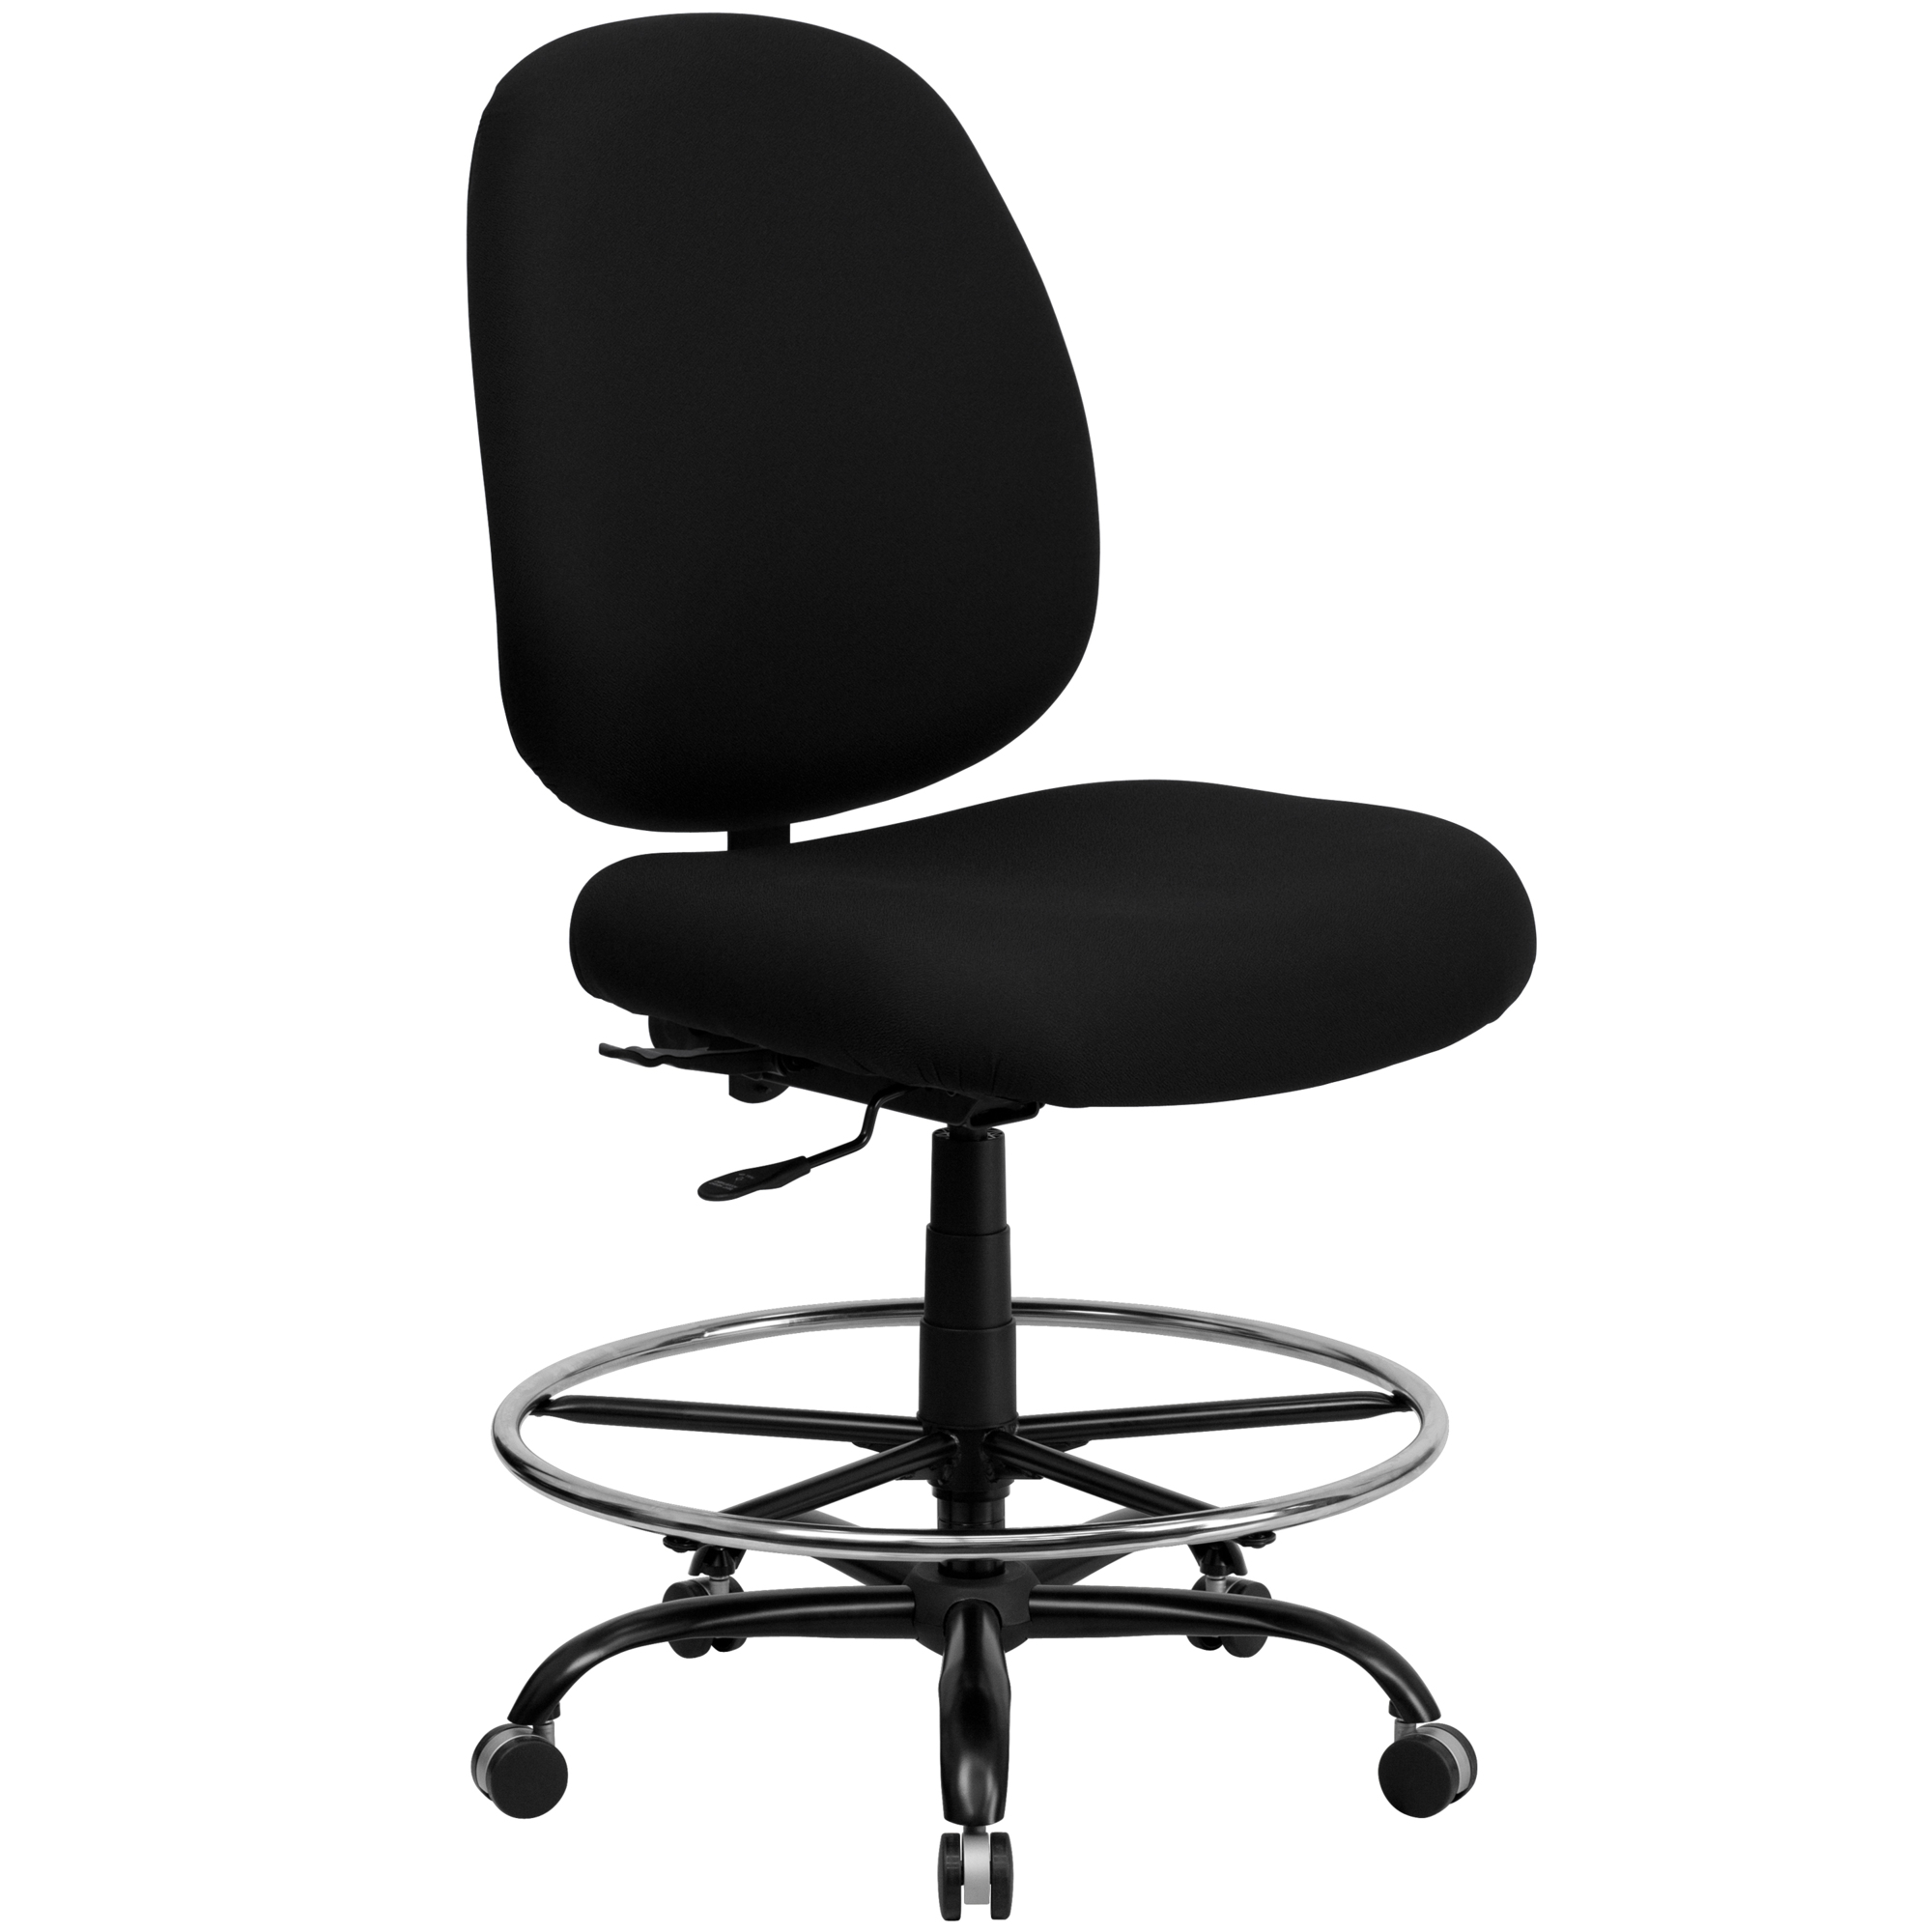 Flash Furniture, 400lb. Rated High Back Black Fabric Drafting Chair, Primary Color Black, Included (qty.) 1, Model WL715MGBKD